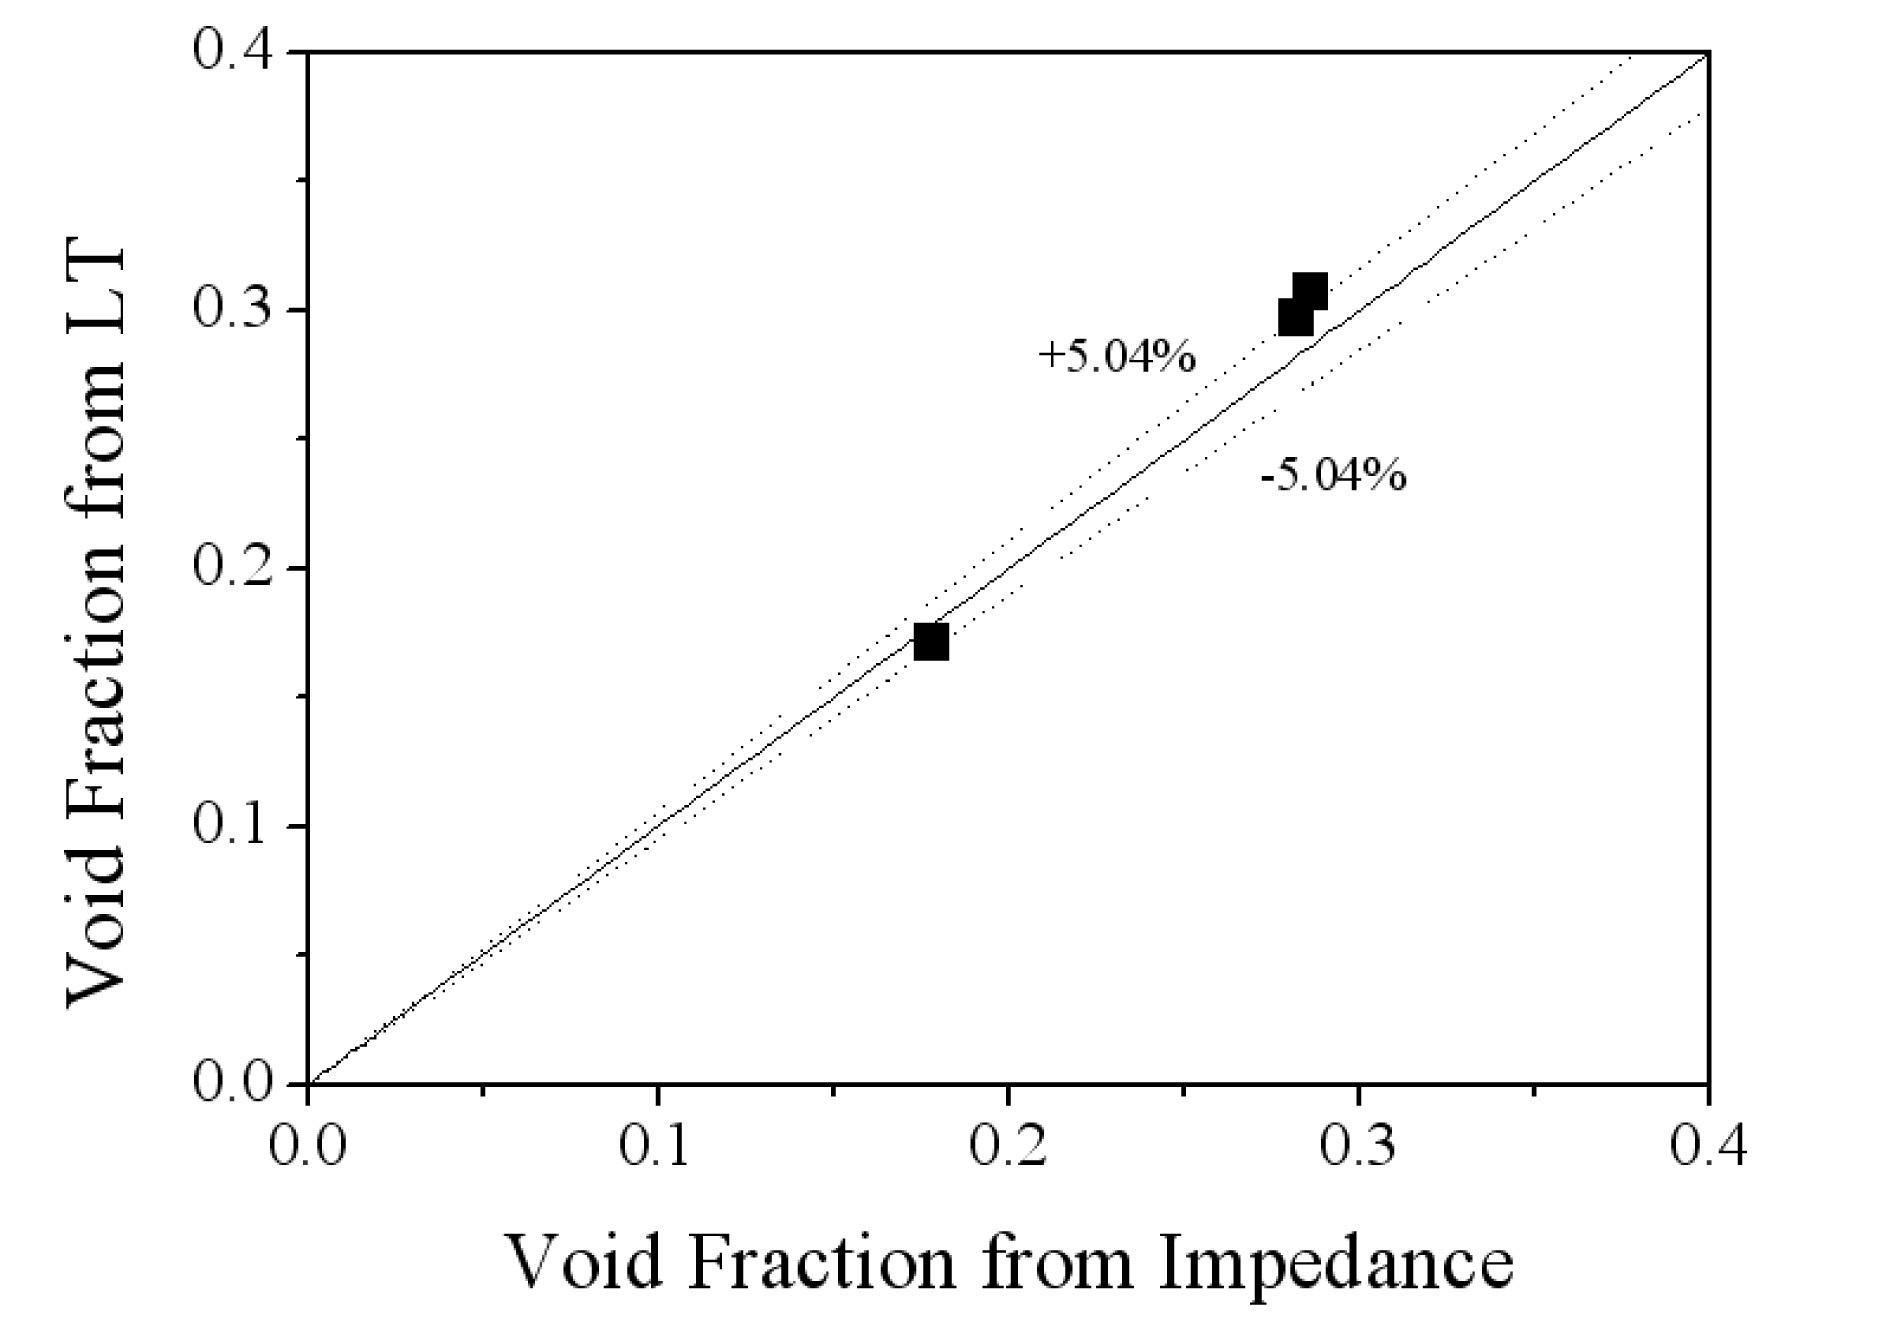 Comparison of the Averaged Void Fractions from Impedance Measurement and DP Transmitters.